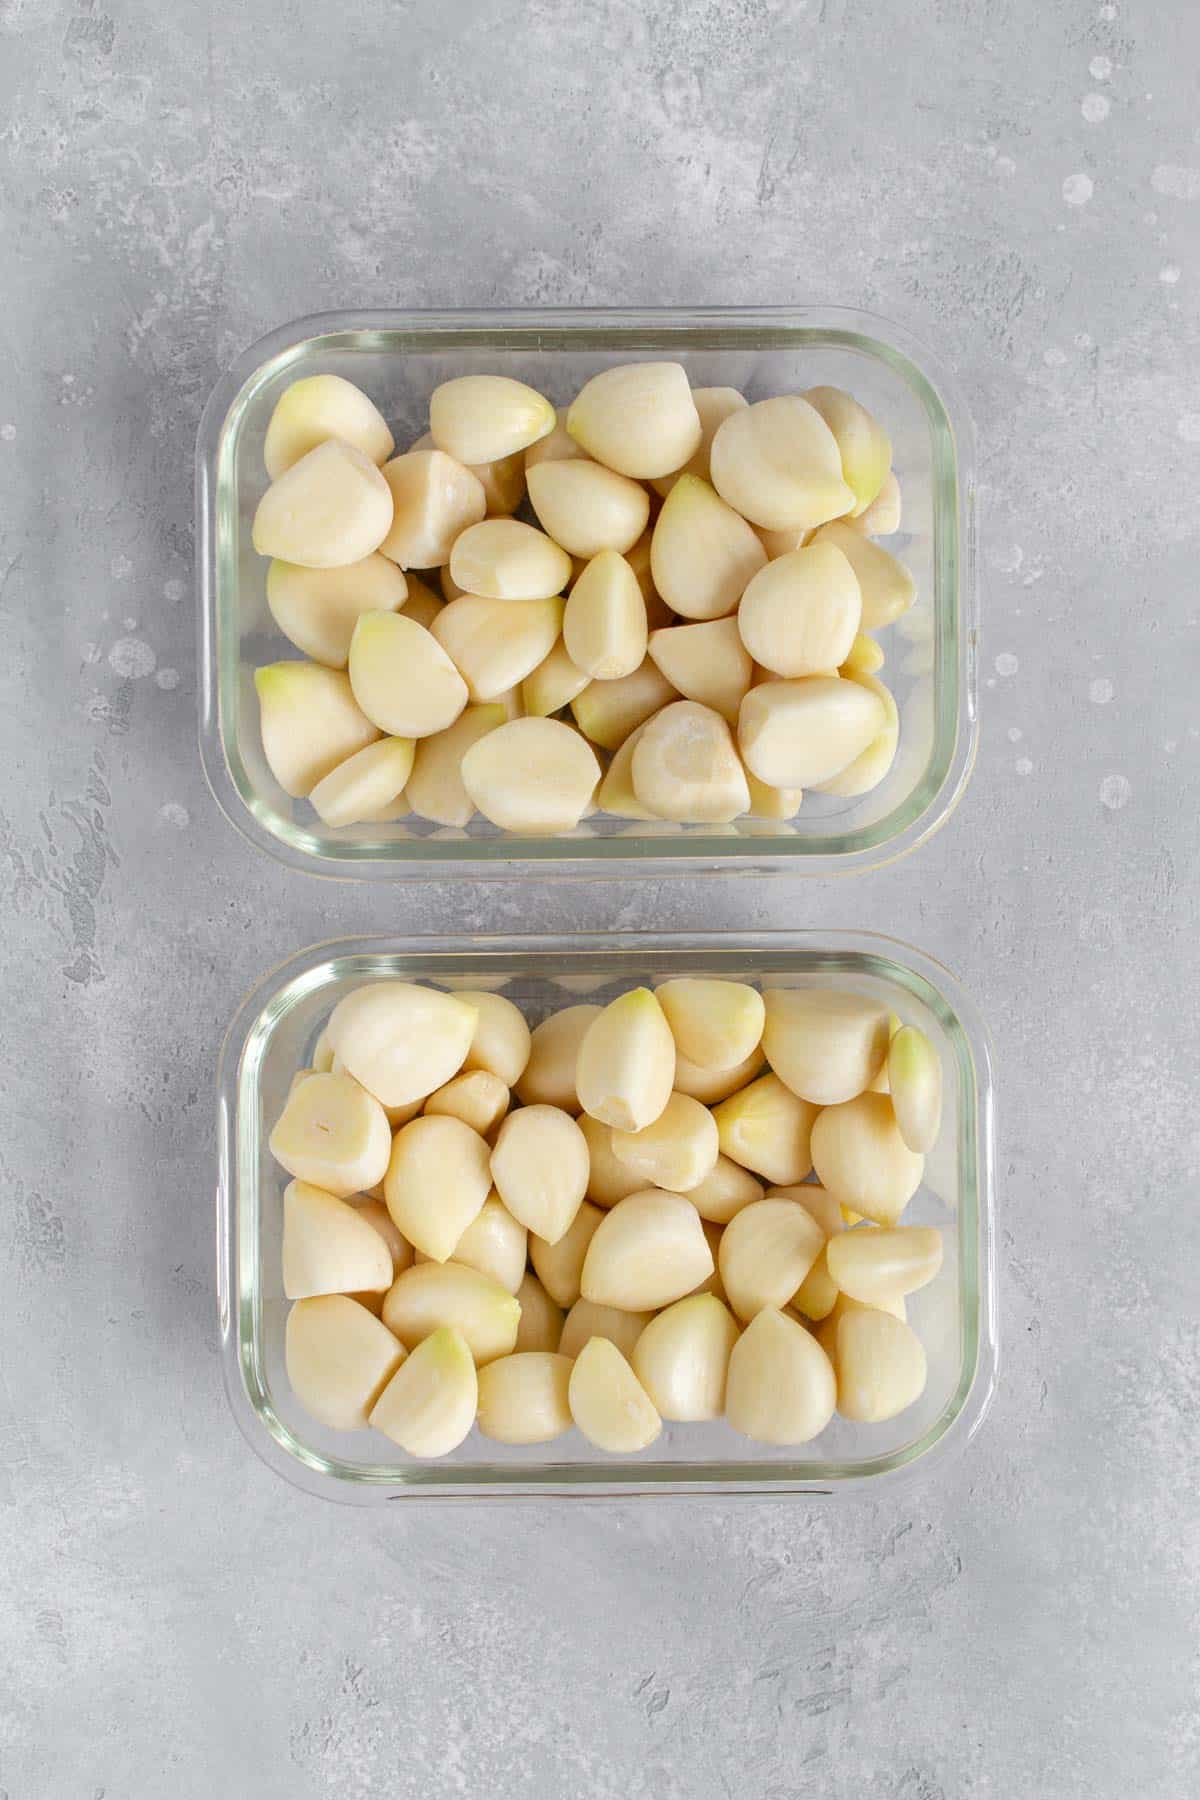 Two containers of frozen garlic cloves.